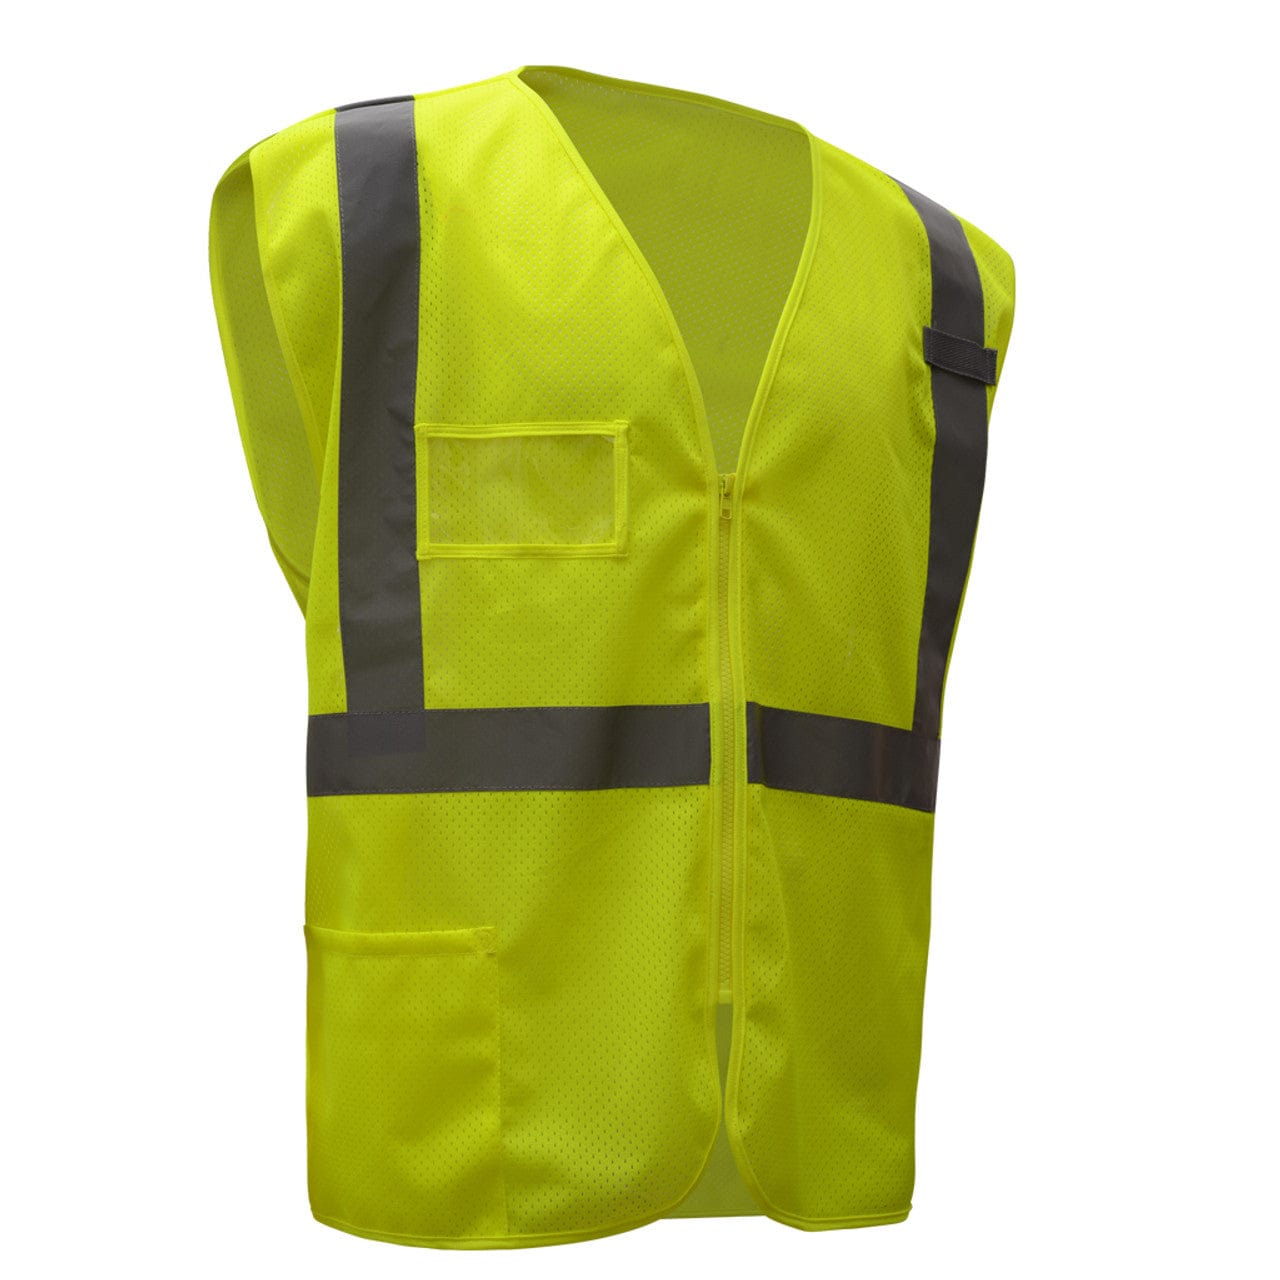 Get noticed and stay safe with our Lime Green Reflective Safety Vest With ID Pouch | Supply Master | Accra, Ghana Safety Clothing Buy Tools hardware Building materials